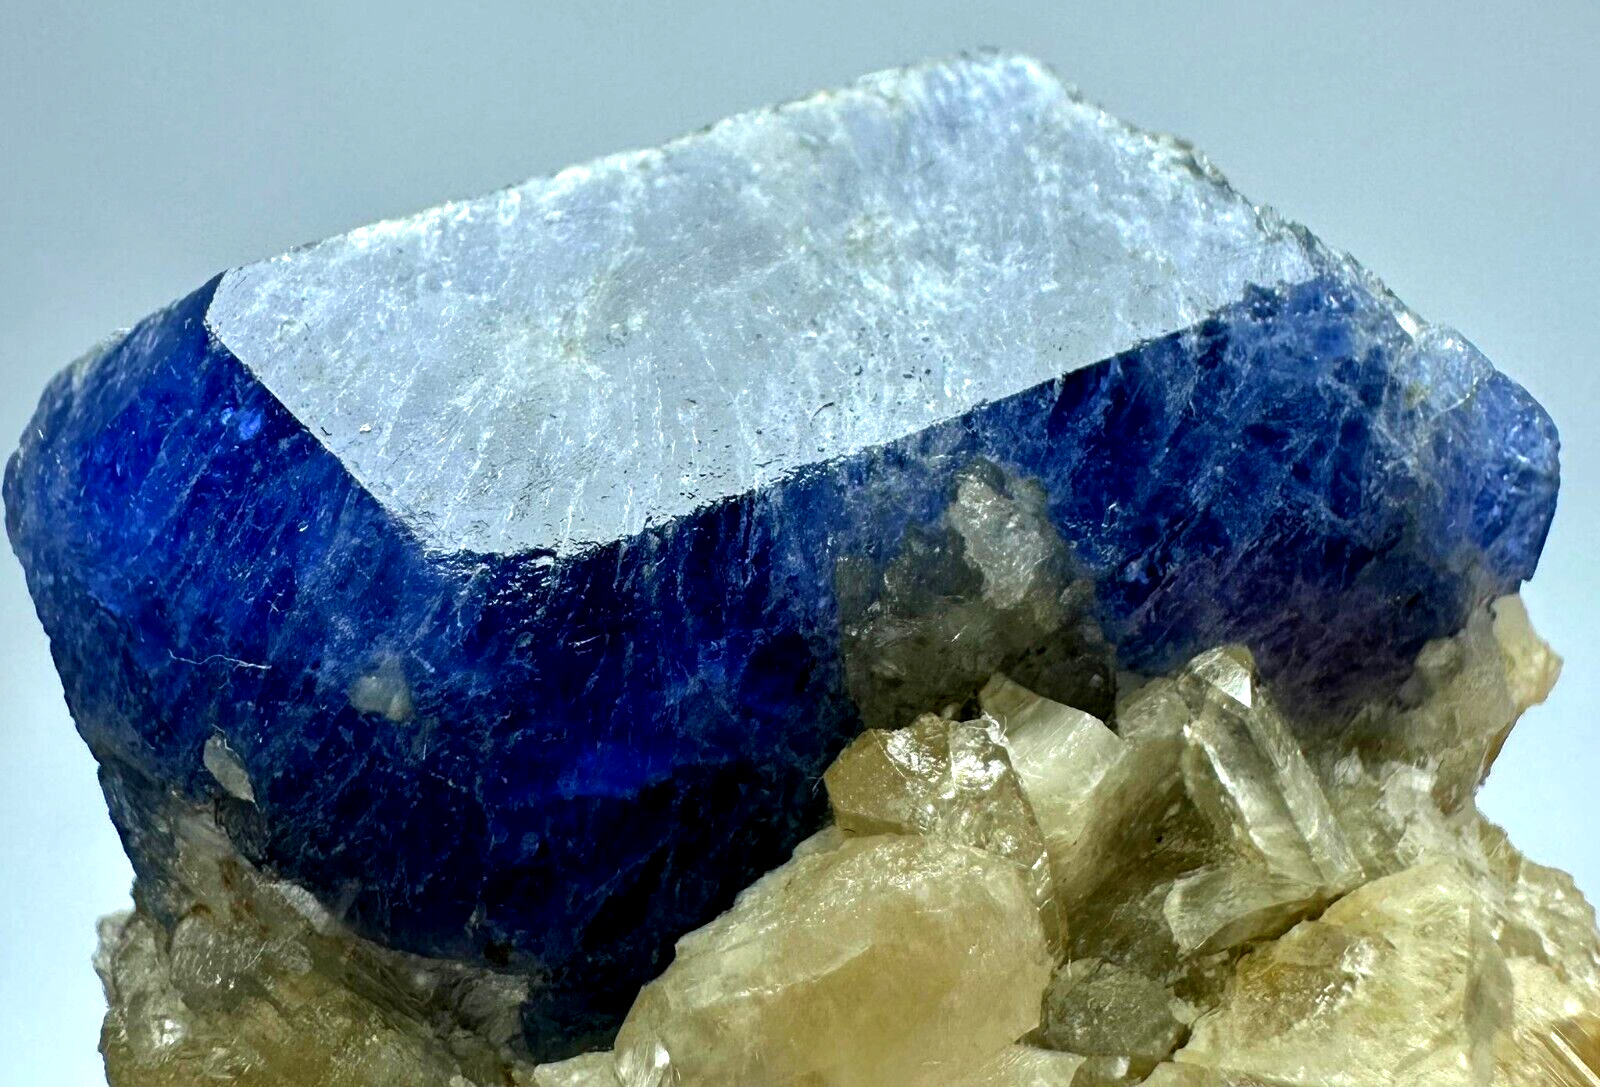 259 Carat Fluorescent Top Blue Hackmanite Crystal On Winchite From @Afg